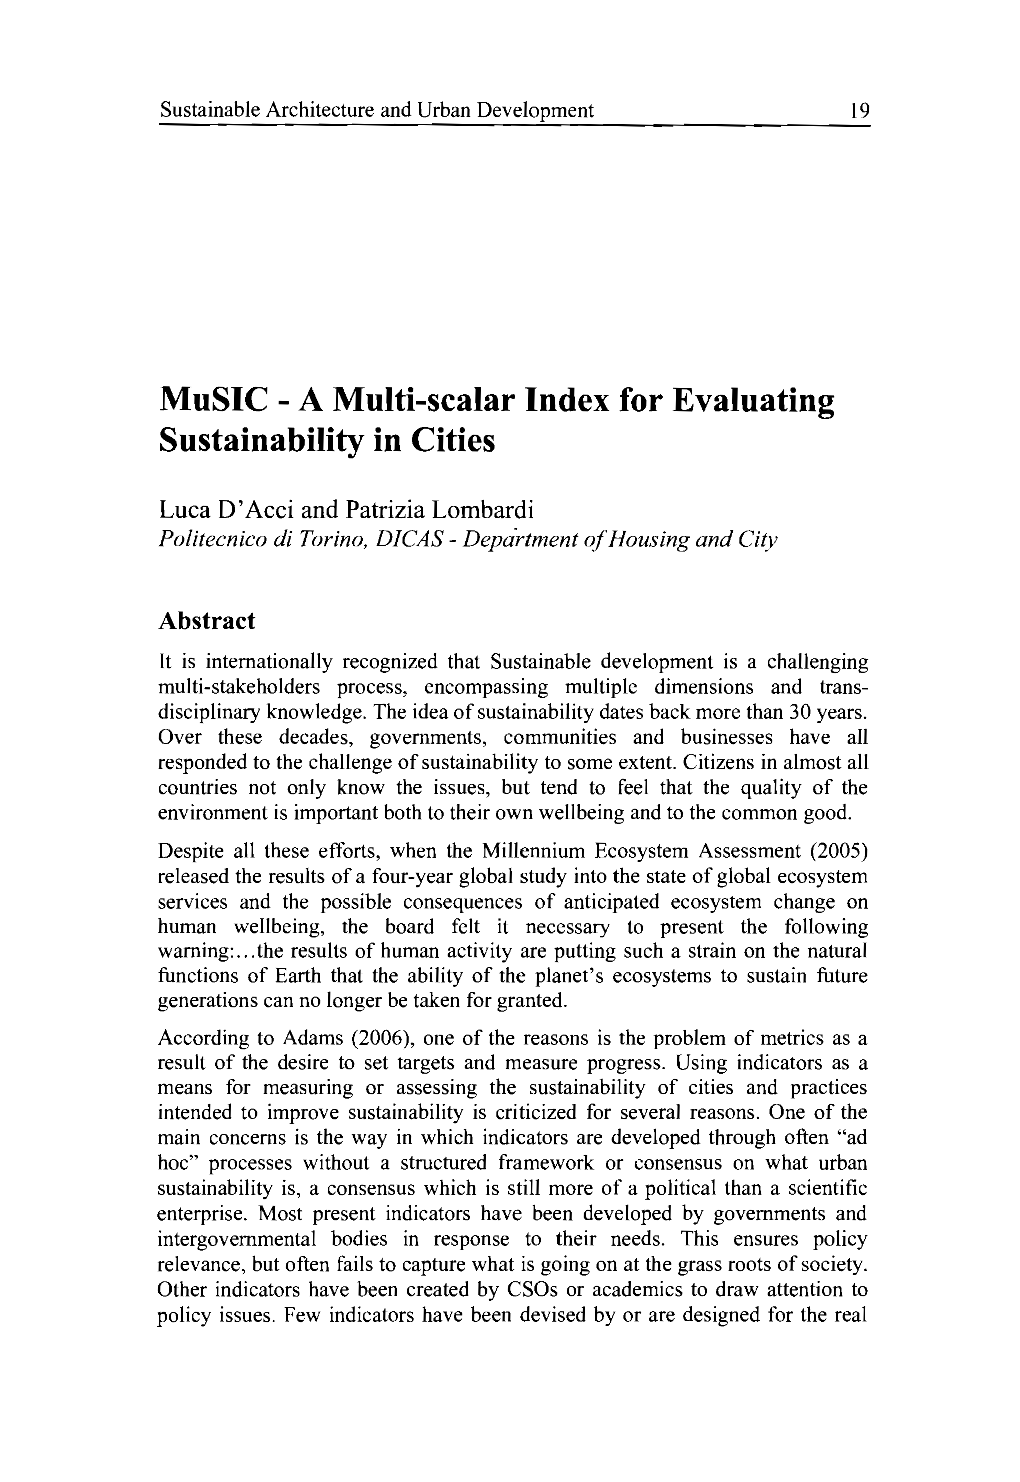 Music - a Multi-Scalar Index for Evaluating Sustainability in Cities